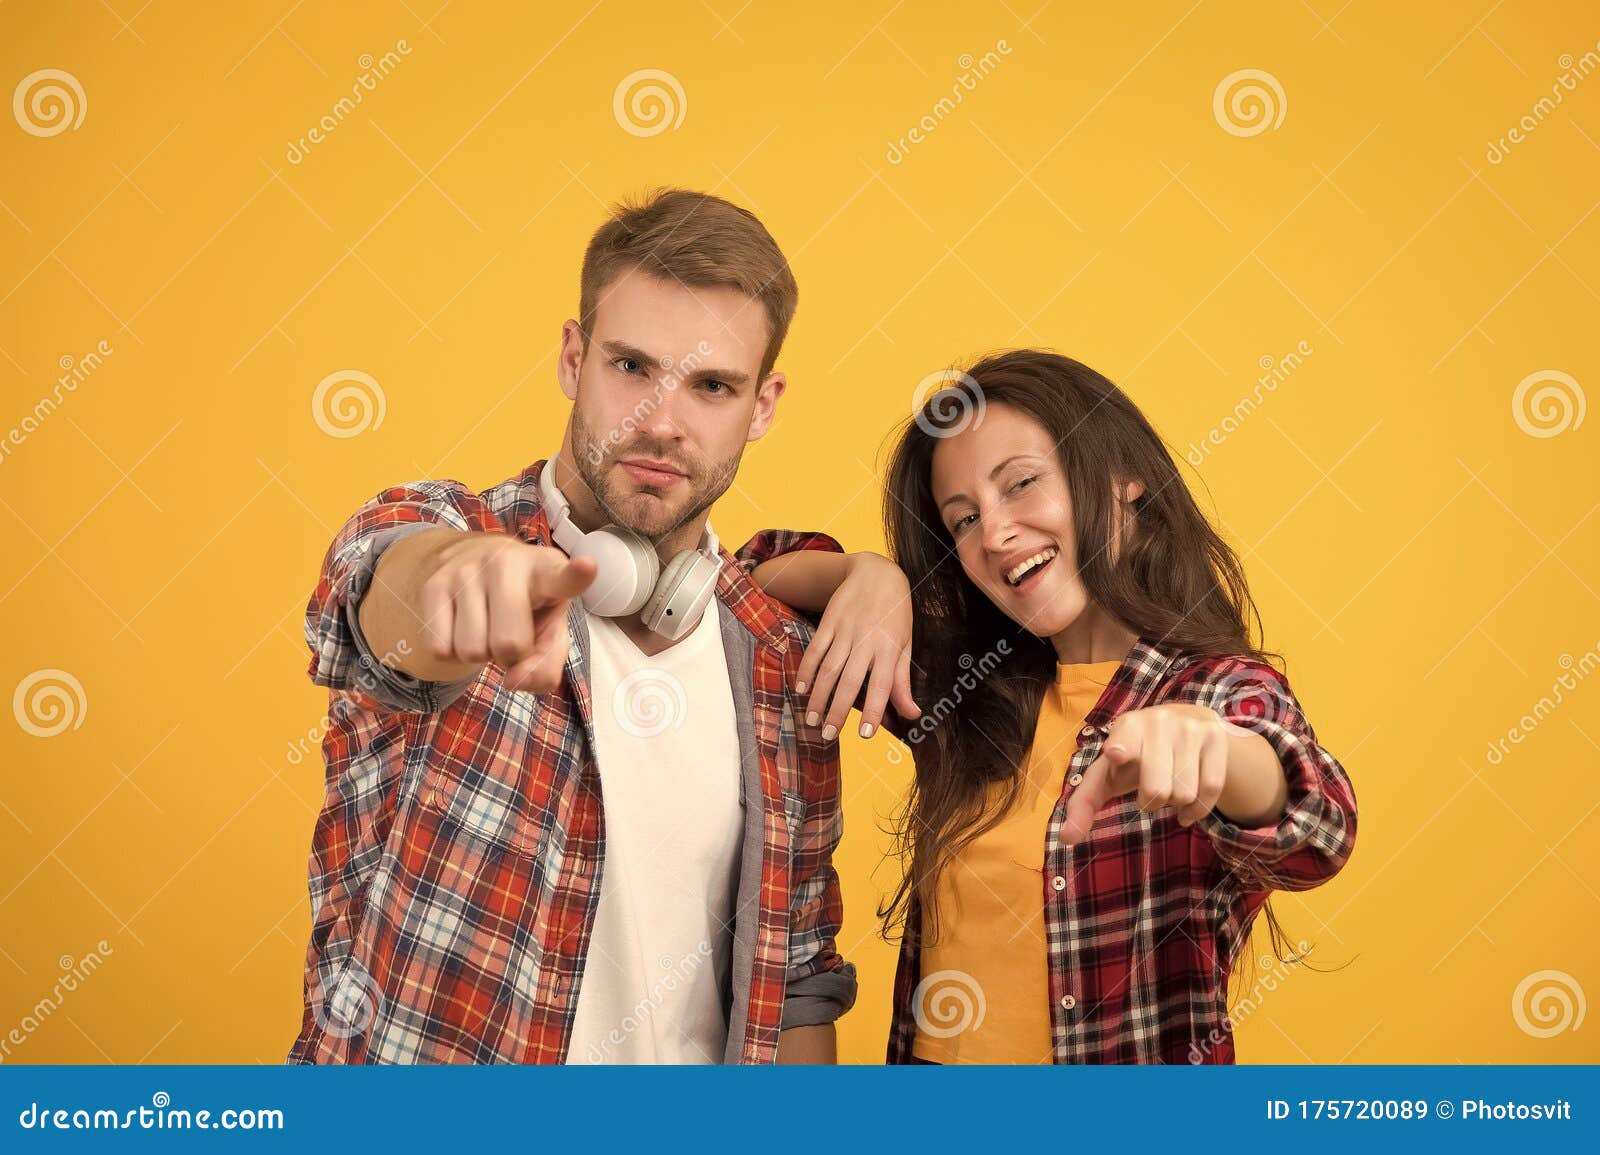 simple-casual-clothes-couple-feeling-comfortable-country-music-concept-country-style-woman-man-wear-checkered-simple-casual-175720089.jpg